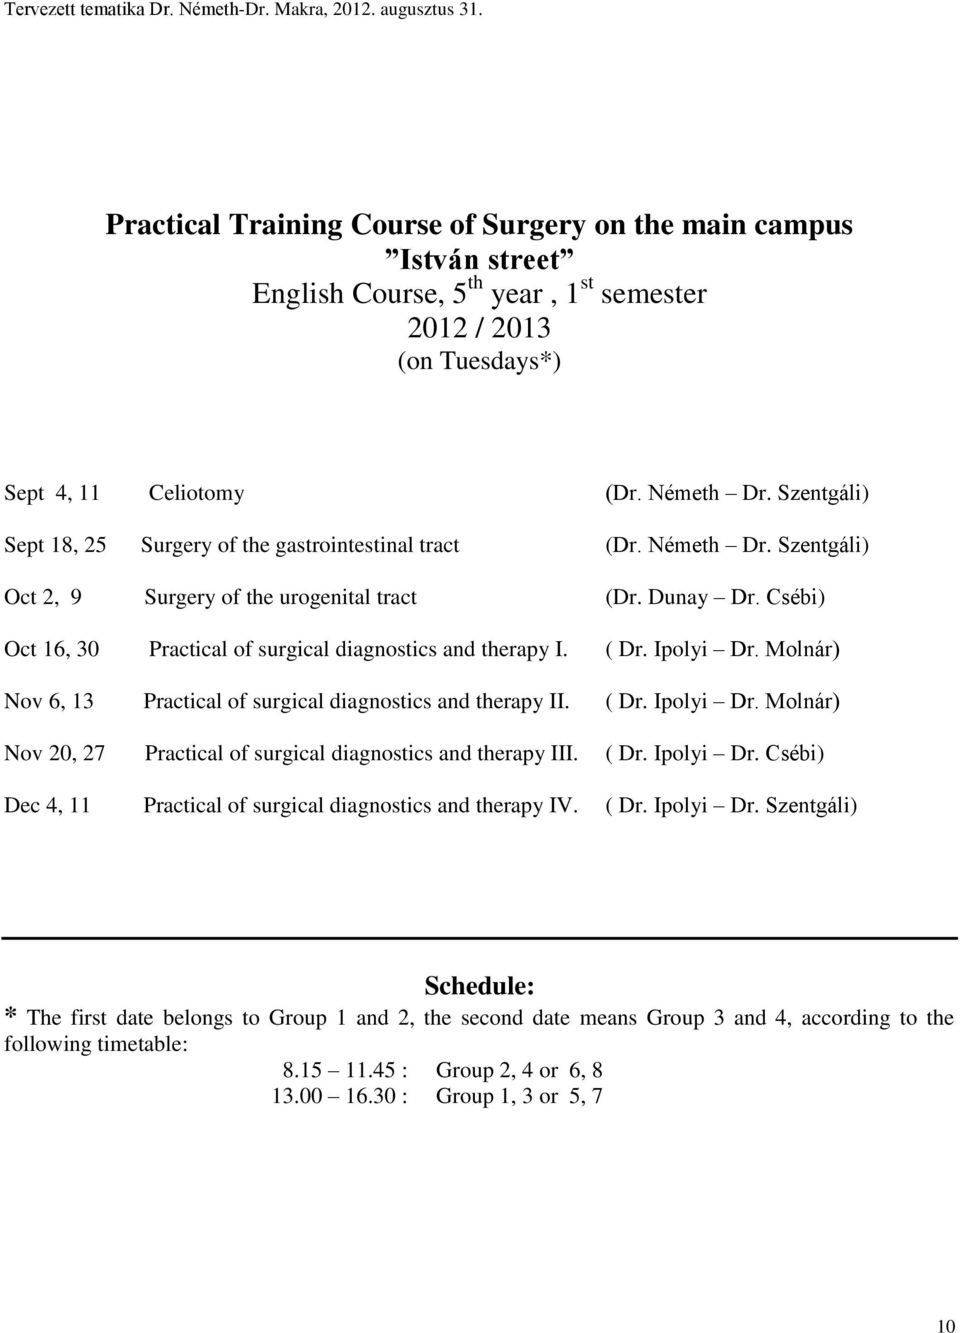 Csébi) Oct 16, 30 Practical of surgical diagnostics and therapy I. ( Dr. Ipolyi Dr. Molnár) Nov 6, 13 Practical of surgical diagnostics and therapy II. ( Dr. Ipolyi Dr. Molnár) Nov 20, 27 Practical of surgical diagnostics and therapy III.